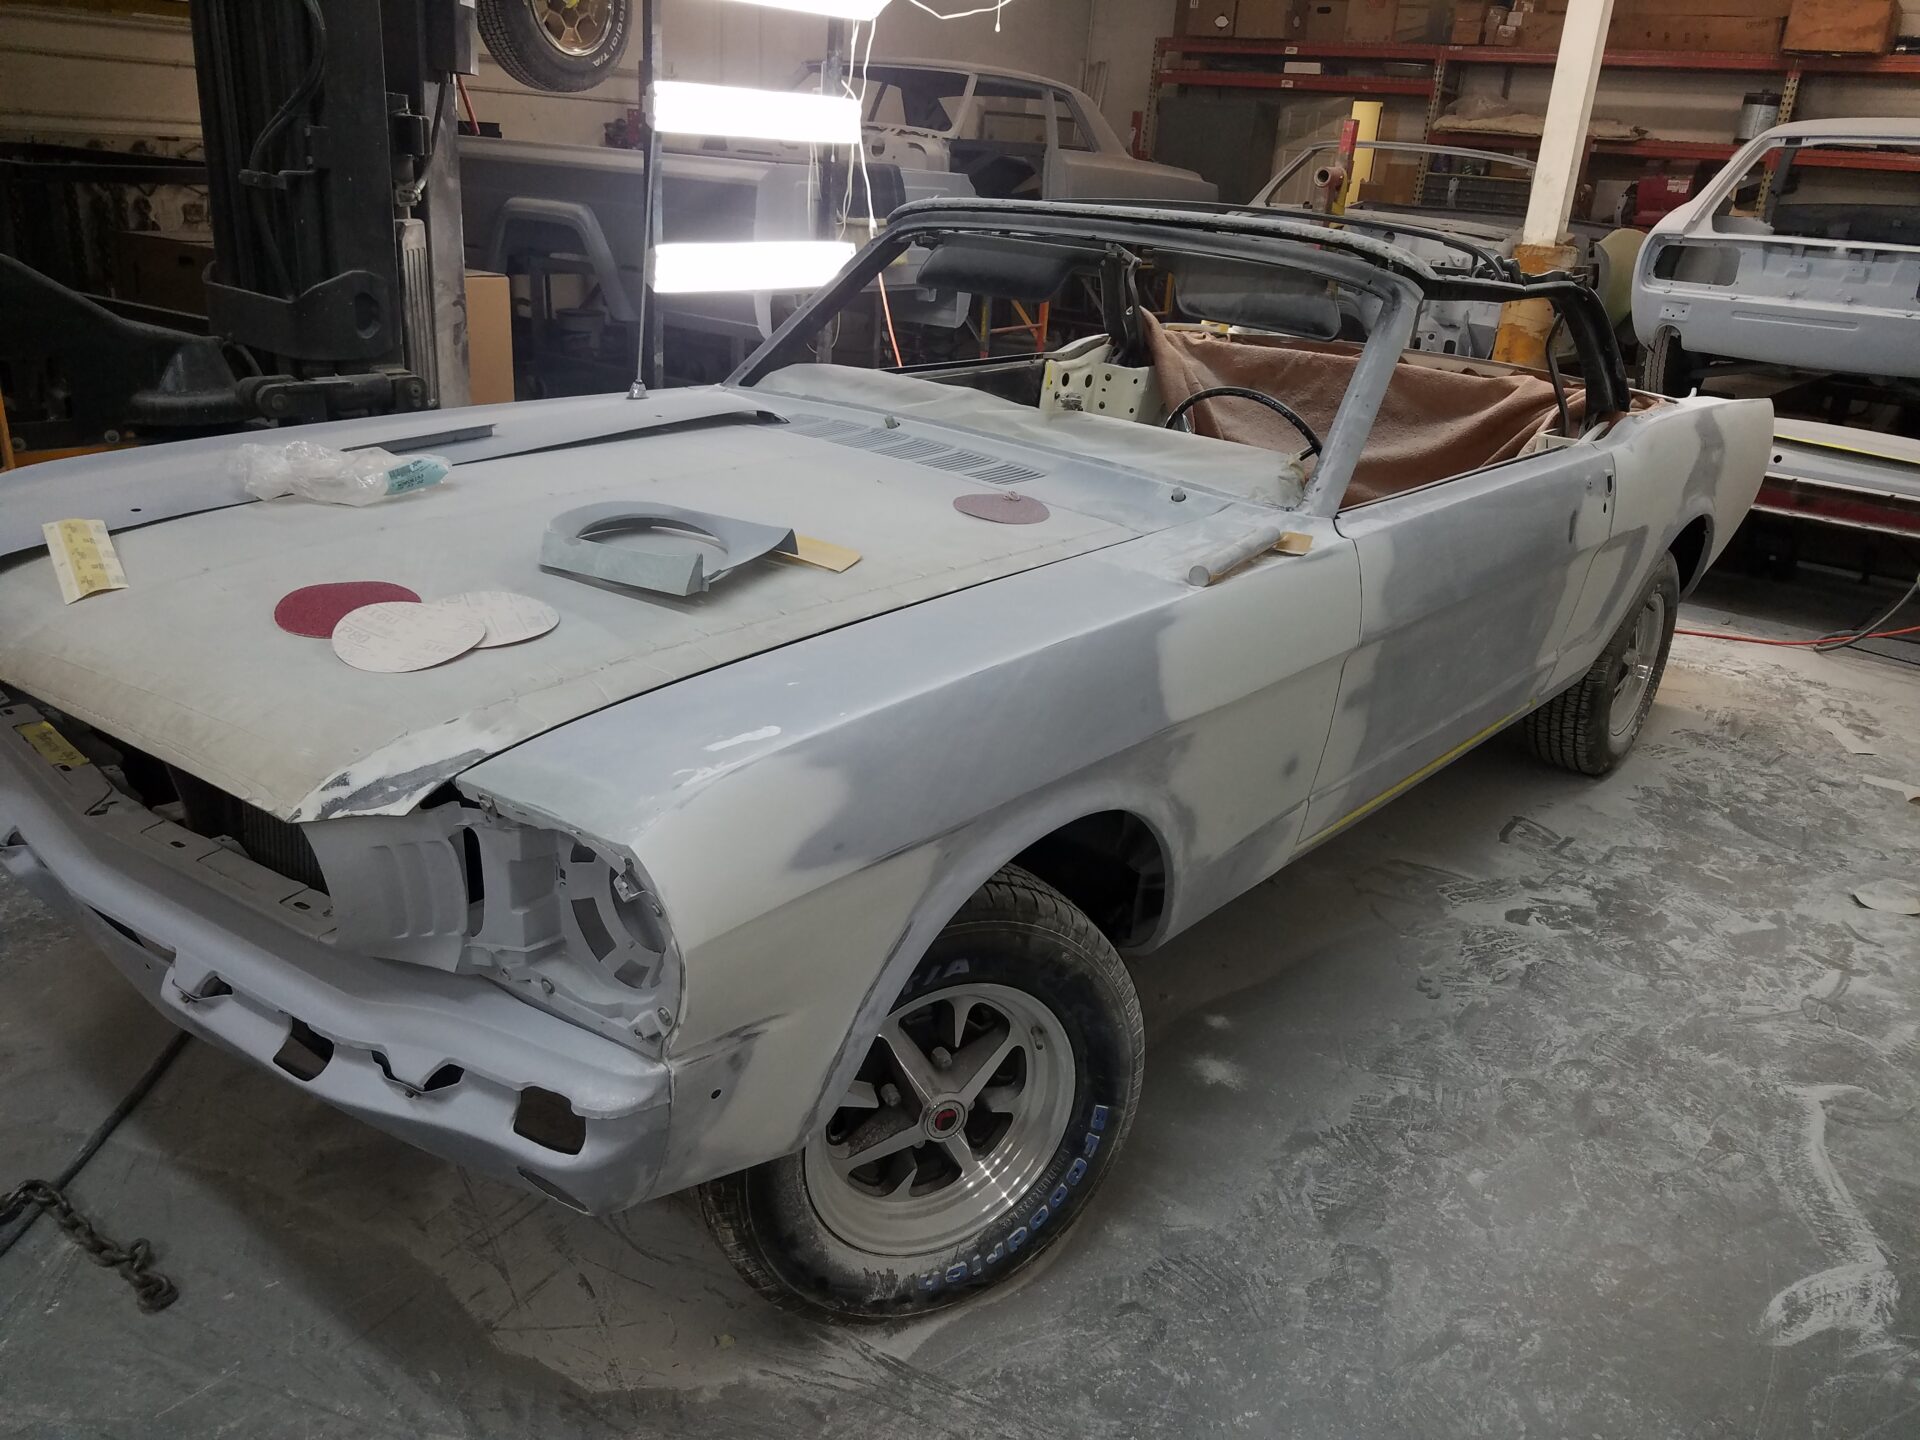 A front of the 1966 Ford Mustang Convertible painted in patches of white